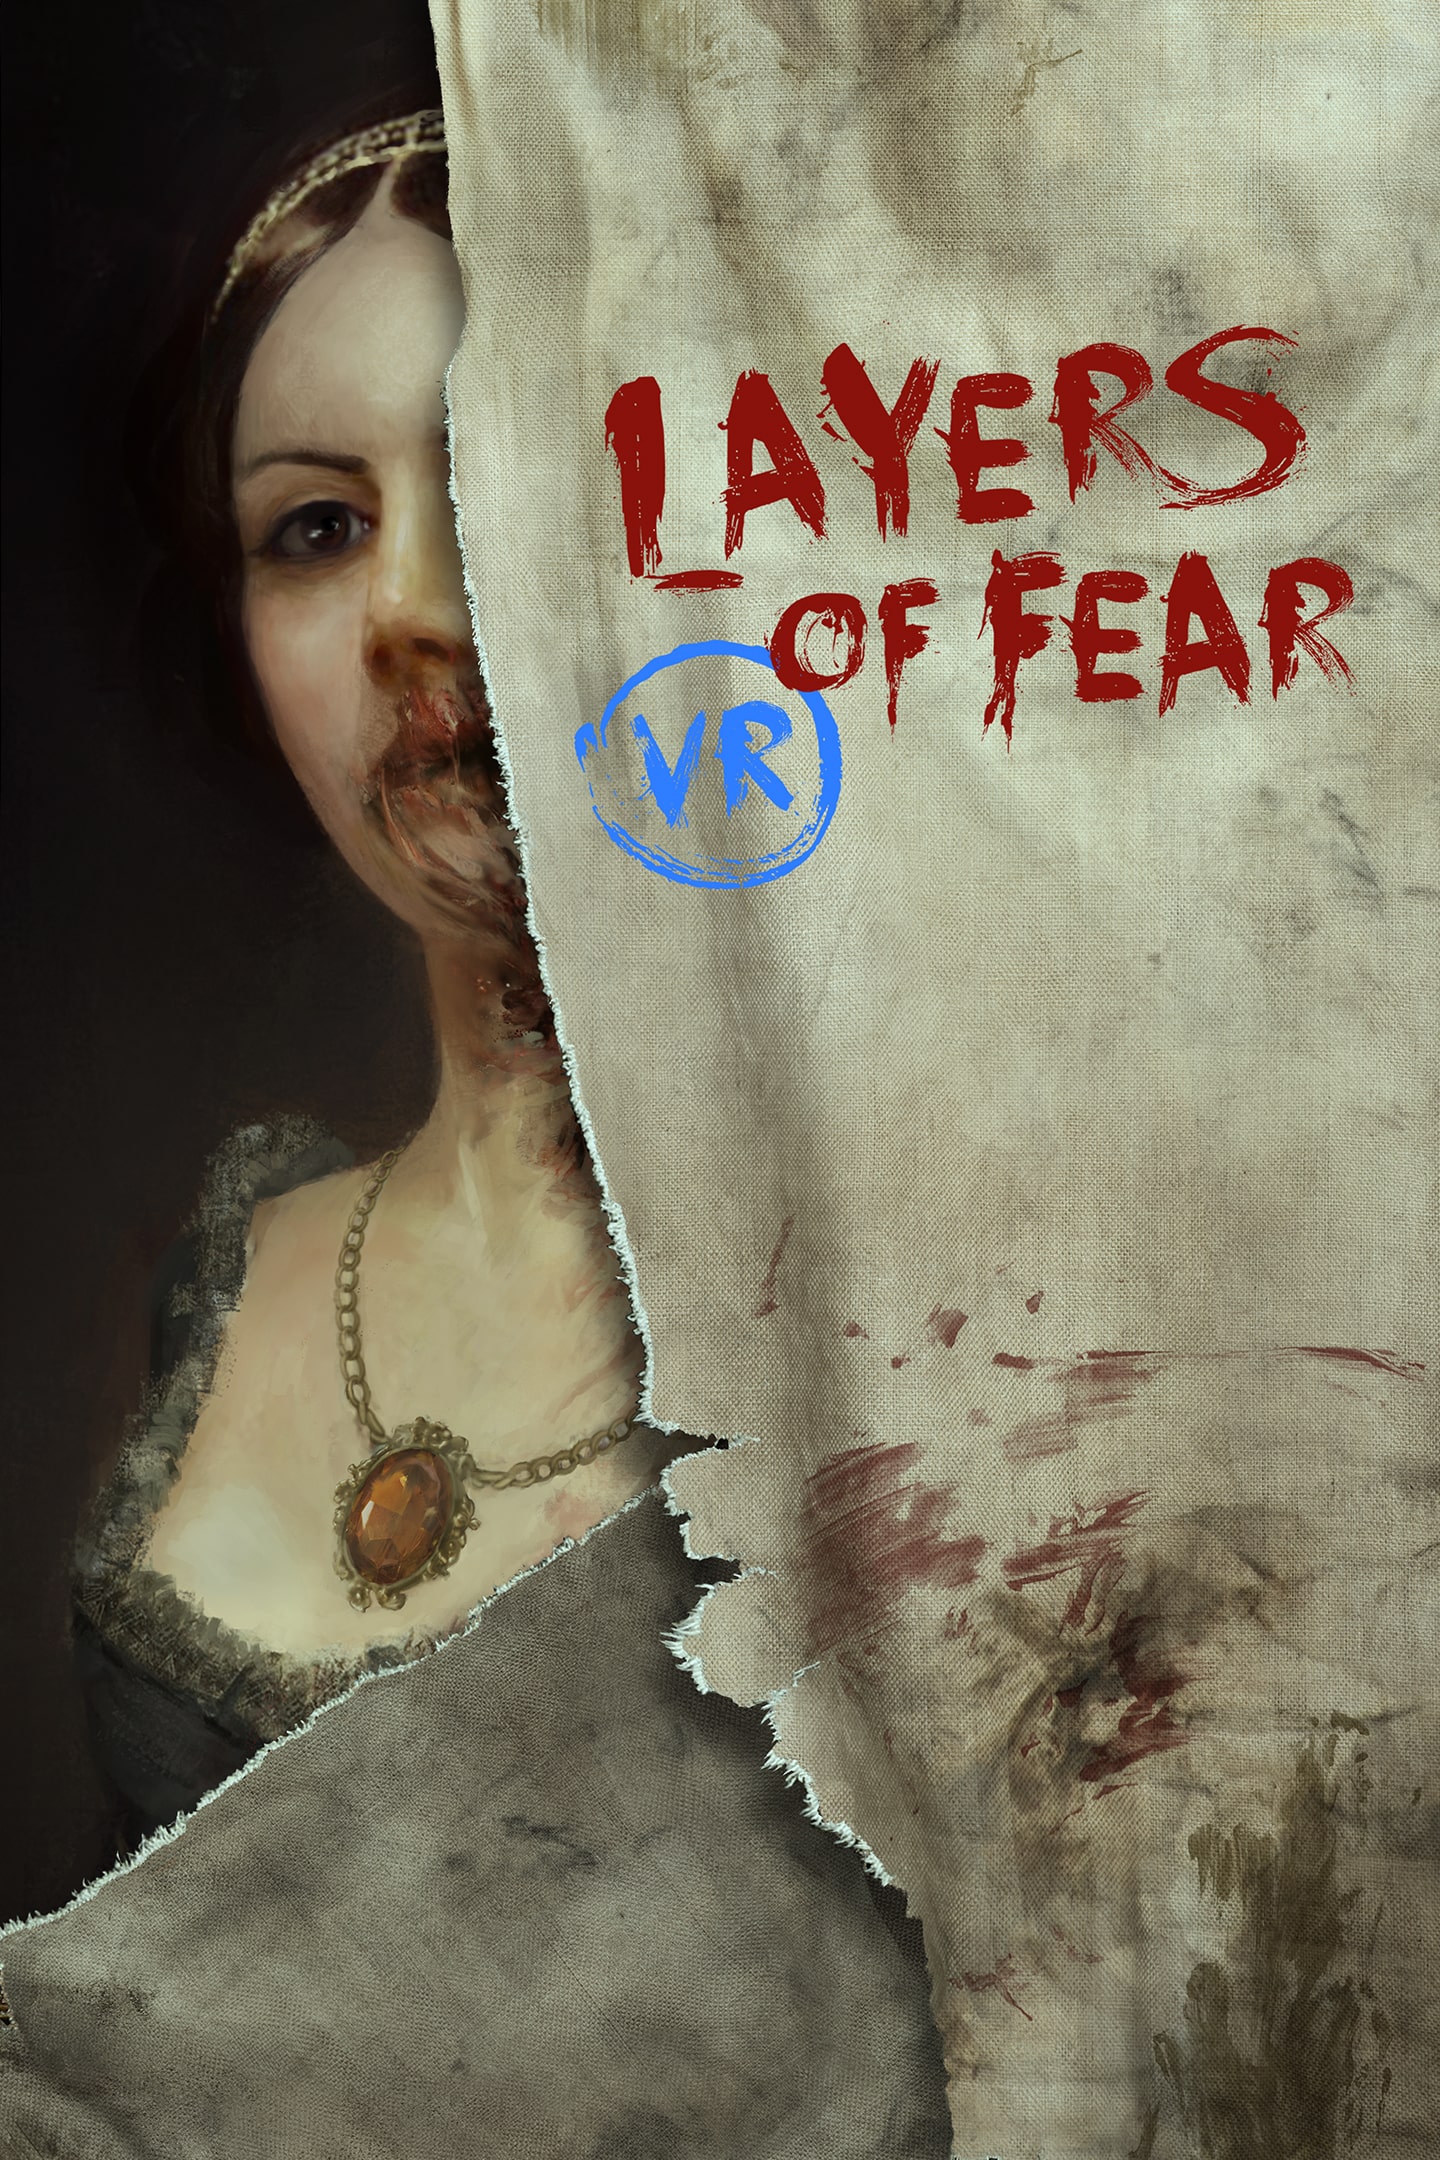 Review: Layers of Fear VR (PlayStation VR) ⋆ Shindig